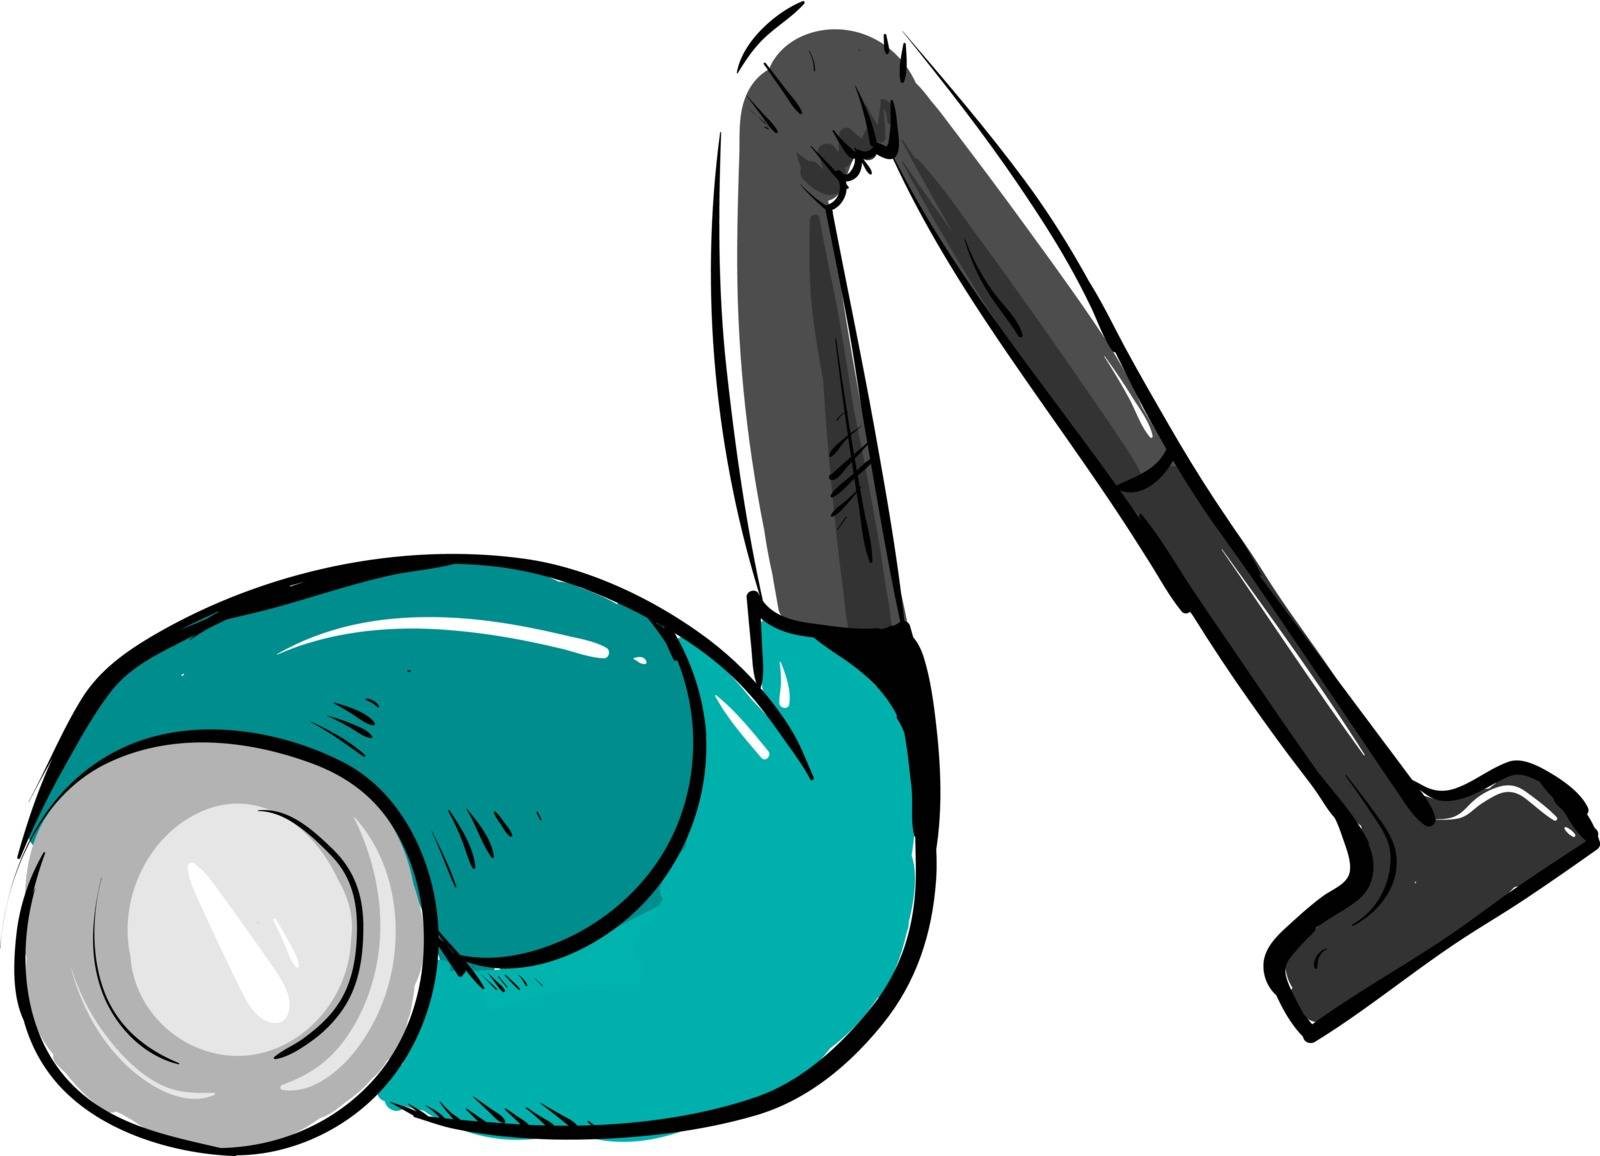 Vaccum cleaner, illustration, vector on white background. by Morphart